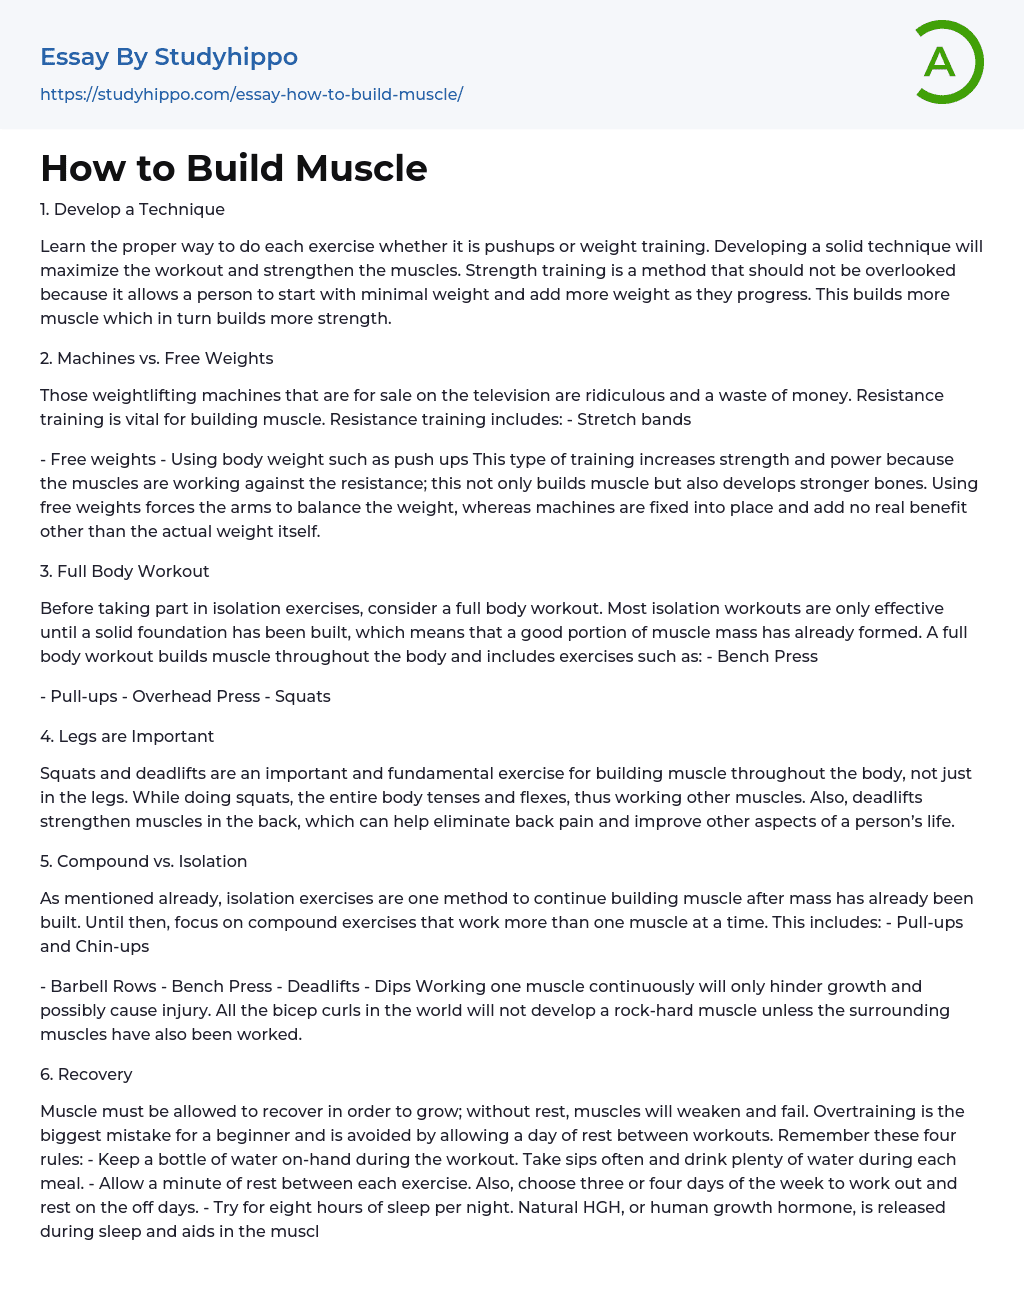 How to Build Muscle Essay Example